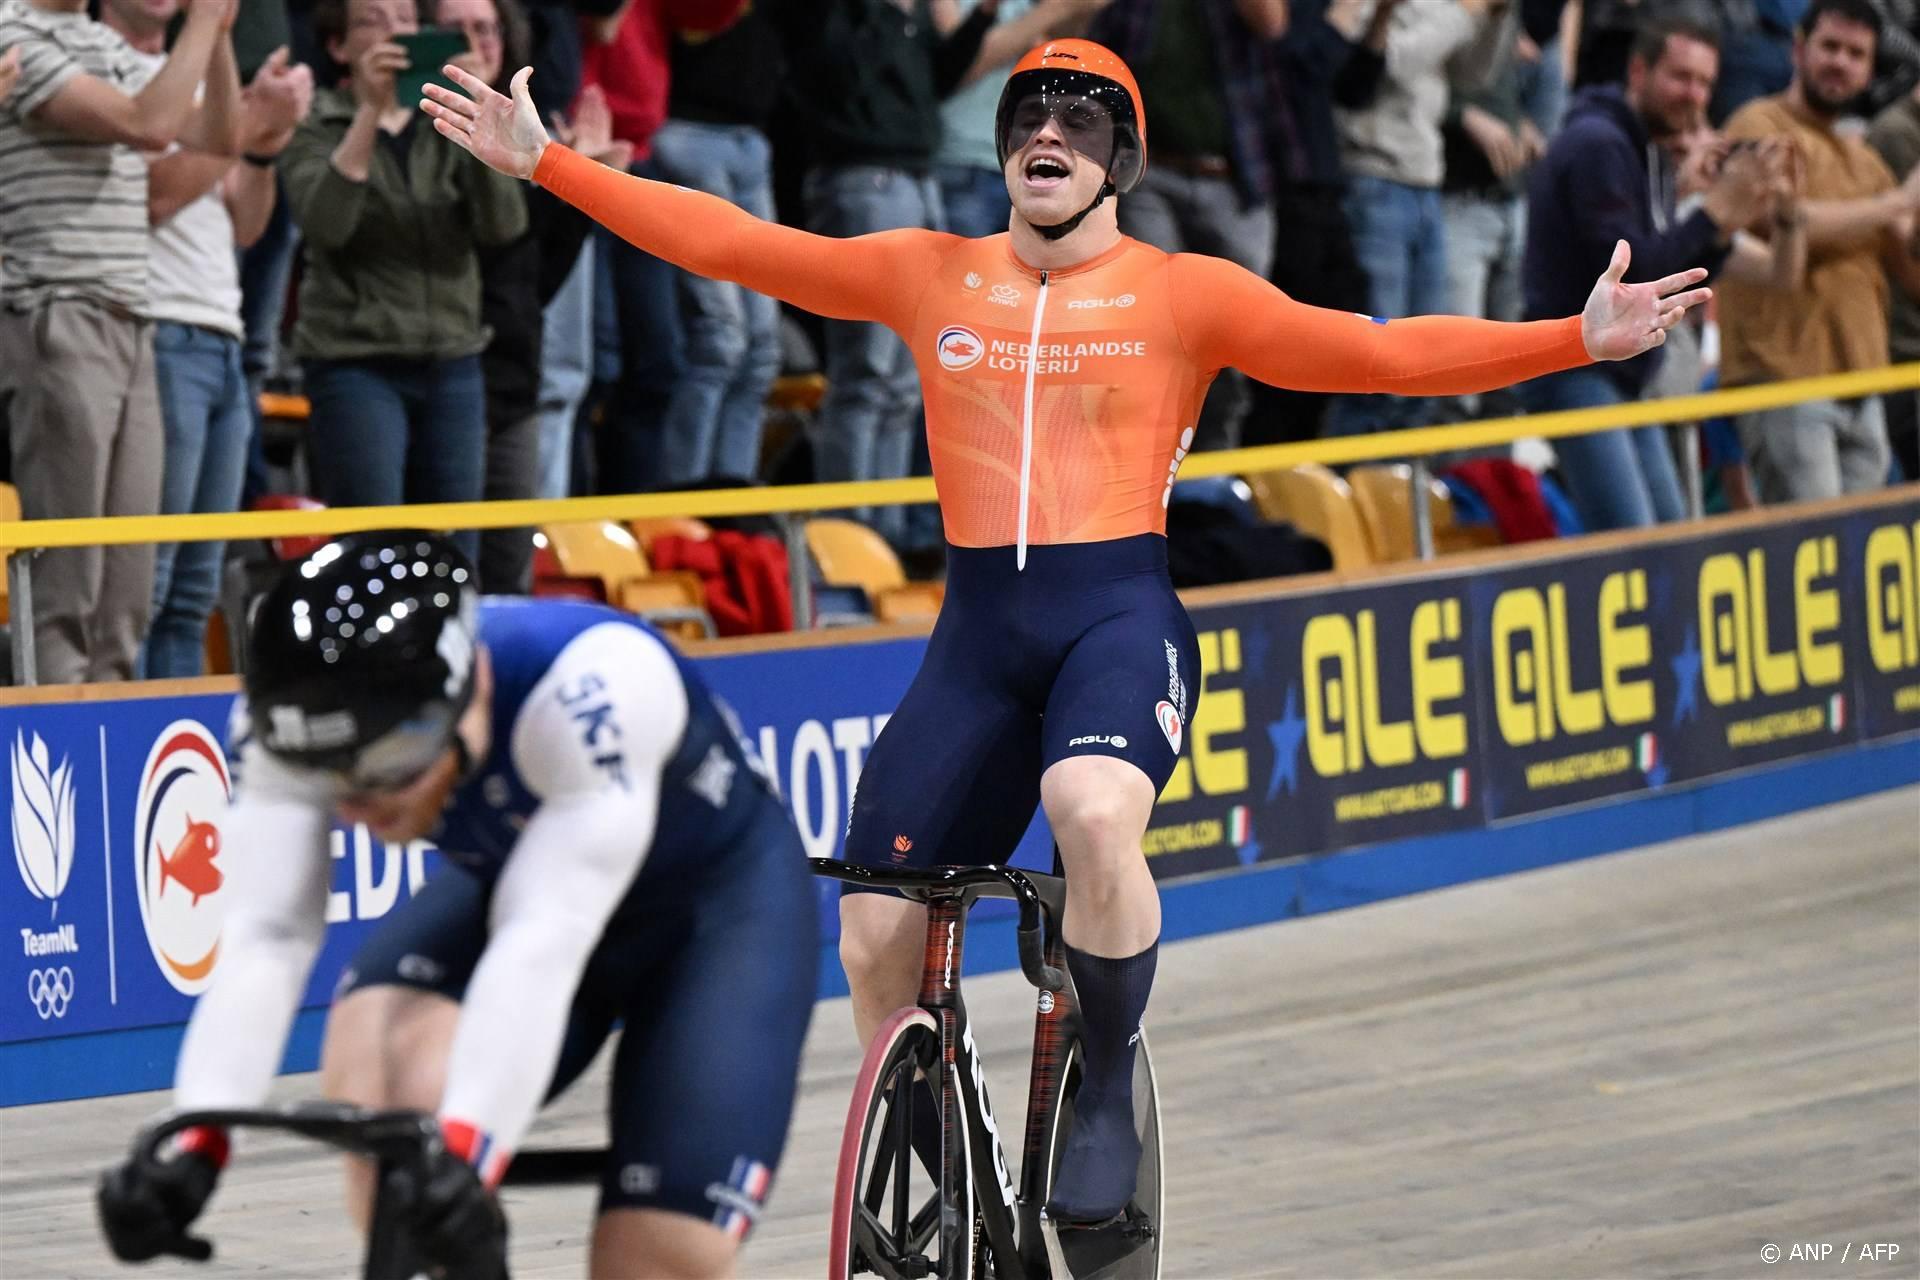 First placed Netherlands' Harrie Lavreysen (C) celebrates winning gold in the final round of the Men's Keirin race during the fifth day of the UEC European Track Cycling Championships at the Omnisport indoor arena in Apeldoorn, on January 14, 2024. 
JOHN THYS / AFP